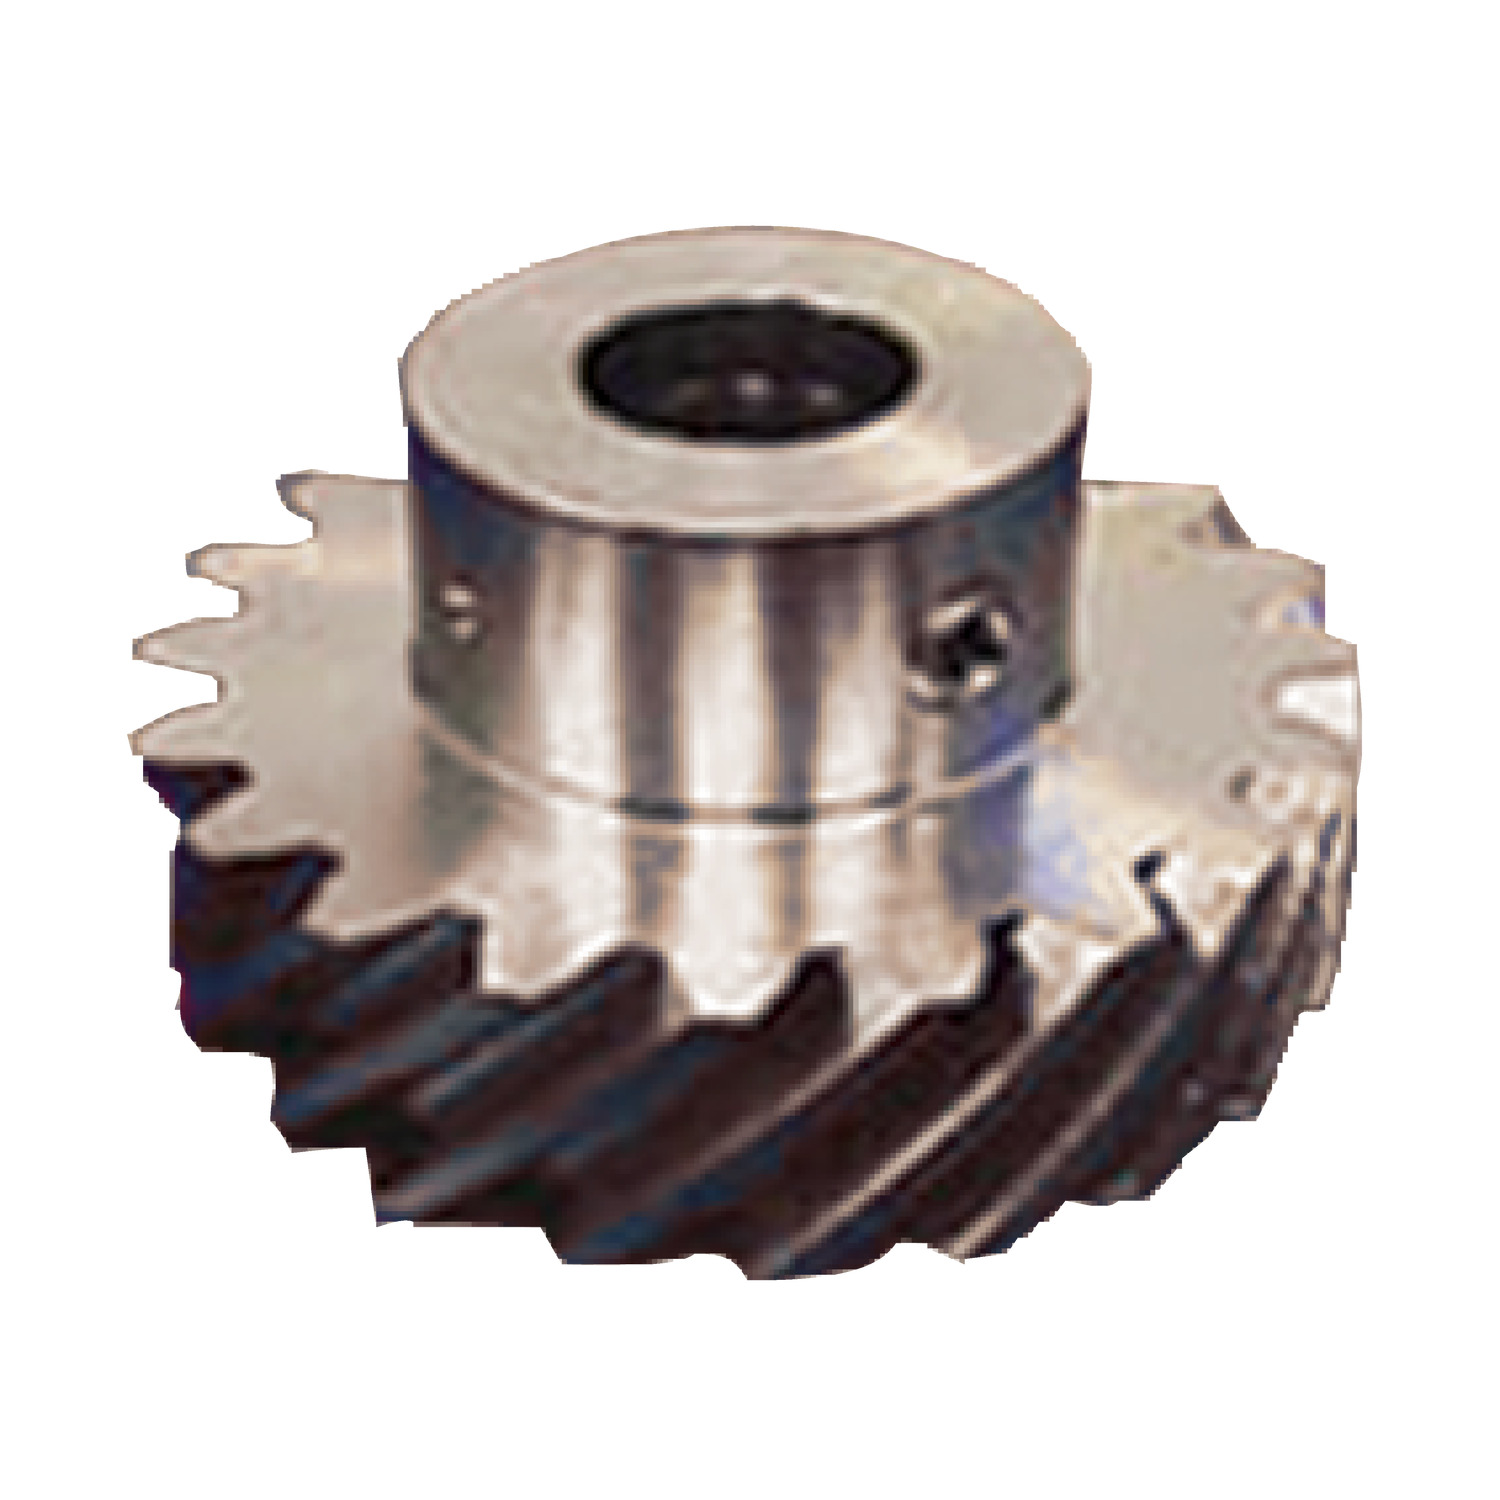 Helical Gears Helical gears are one type of cylindrical gears with slanted tooth trace. A large surface contact ratio helps dampen vibration in transmissions of large forces. Available in siezes 0.4 - 1.5, in stainless steel or alimunium as well as with or without pinhub.